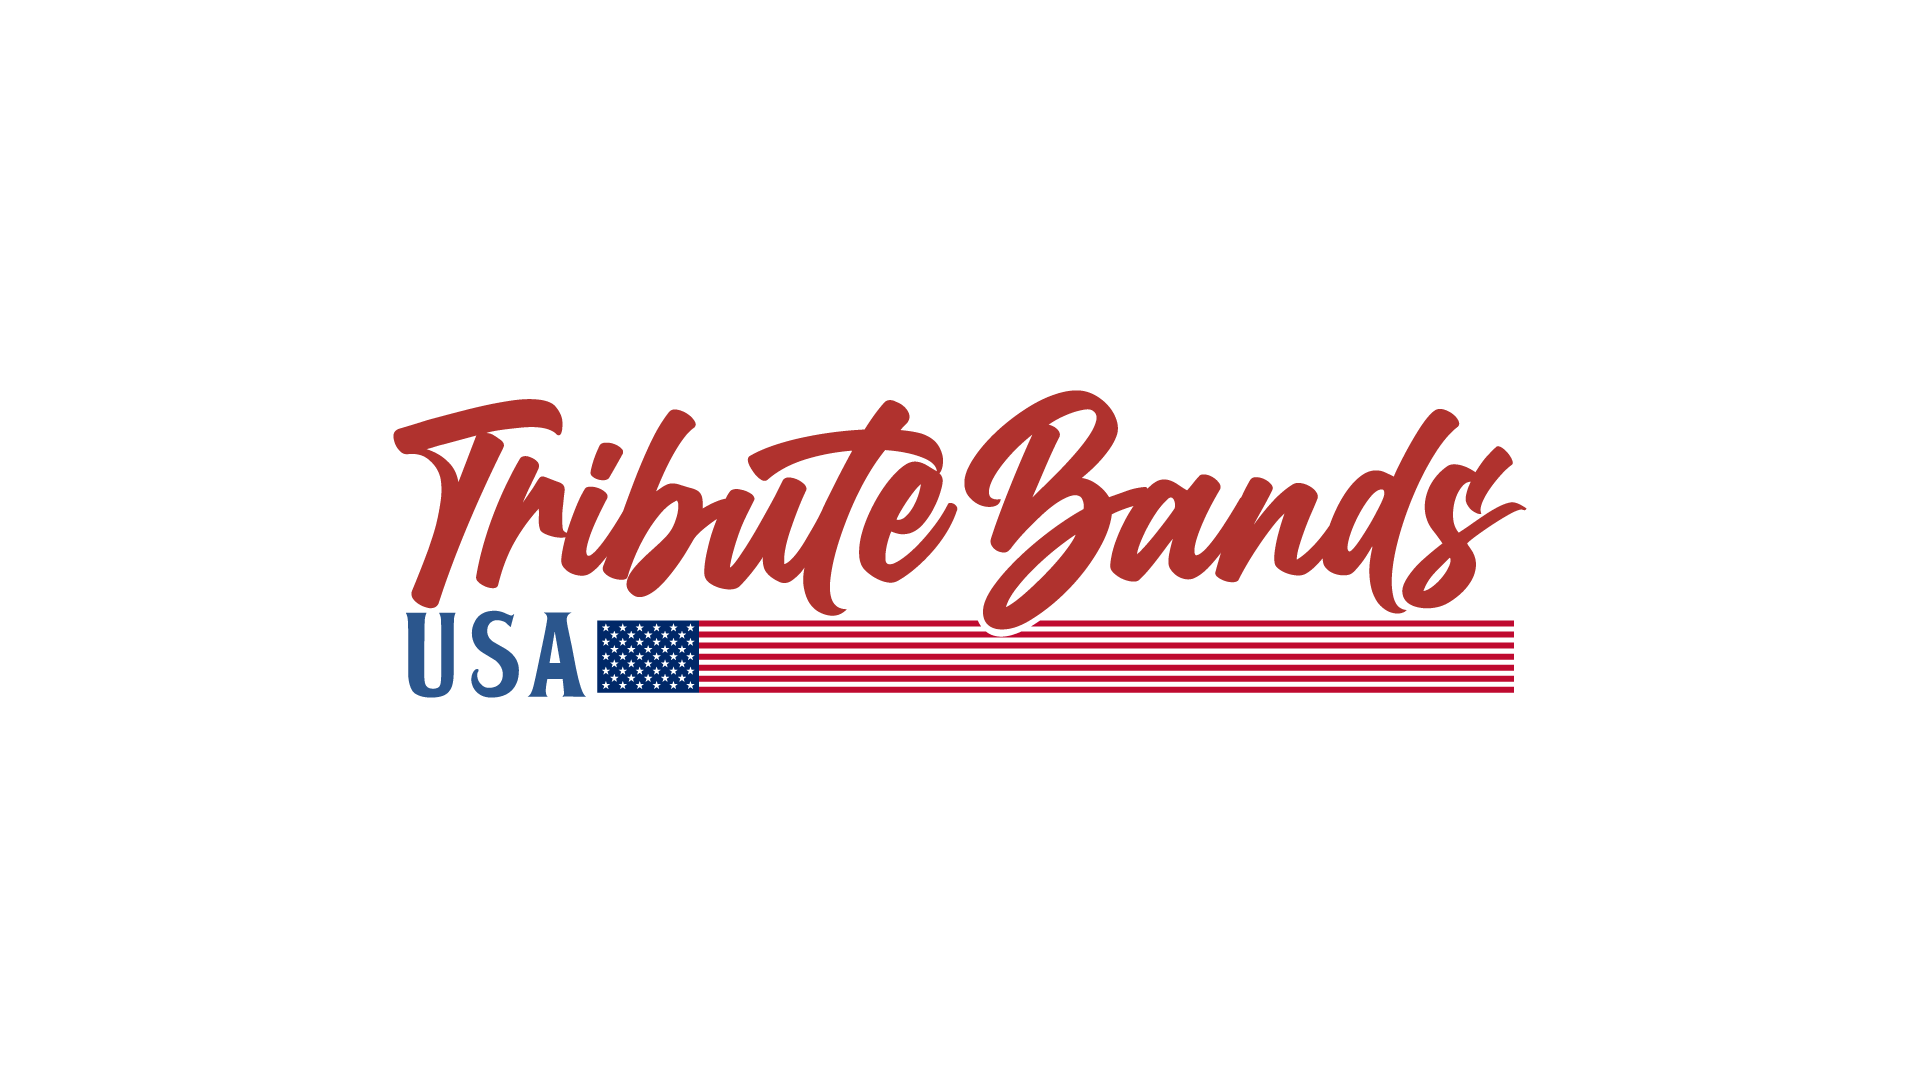 TRIBUTE BANDS USA